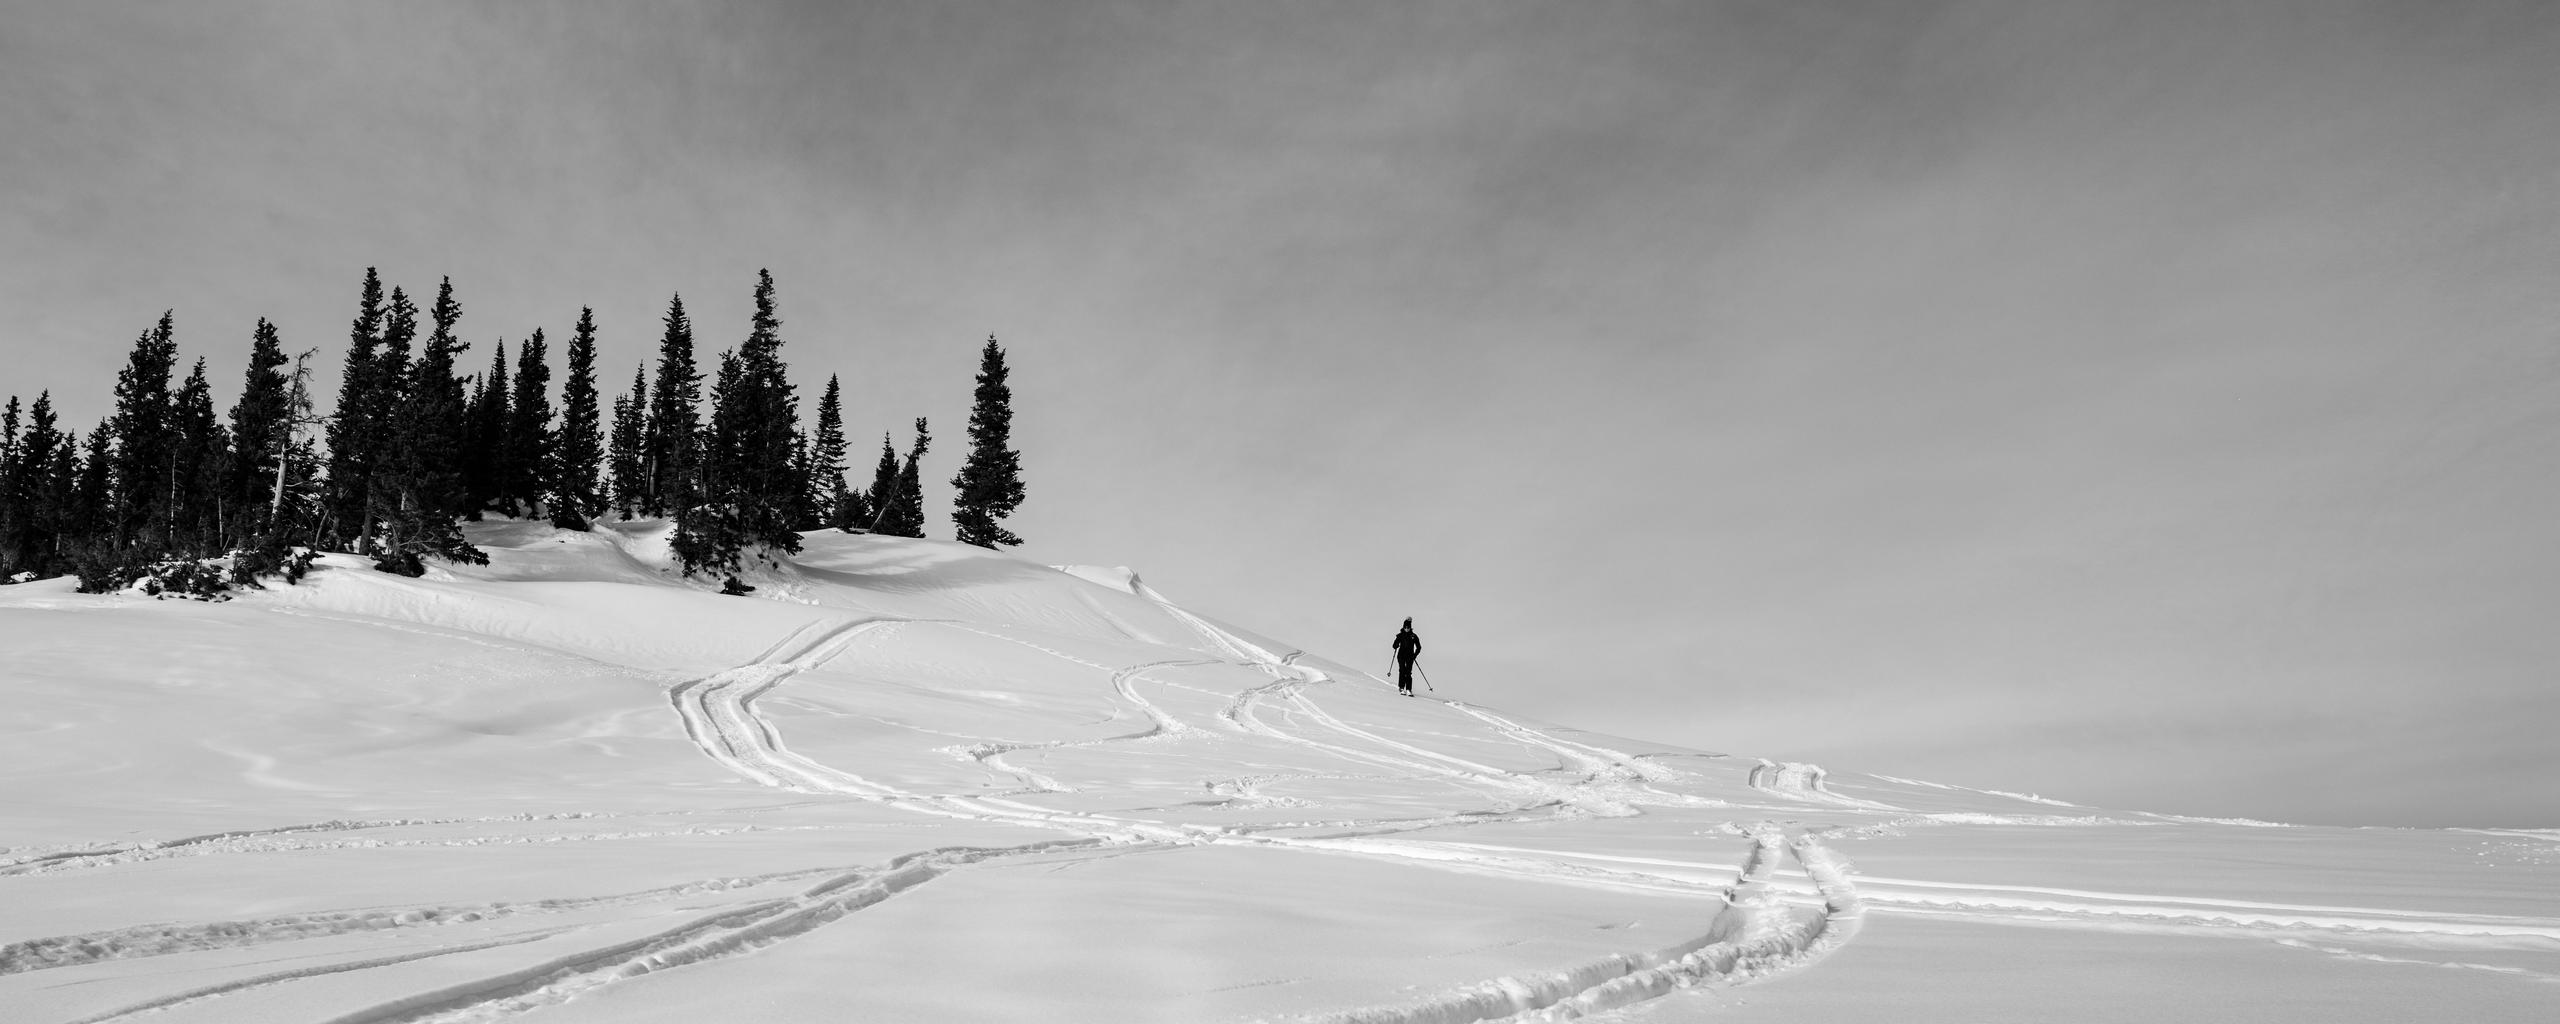 Black and white photo of snowy Aspen backcountry with single woman skiing in the distance